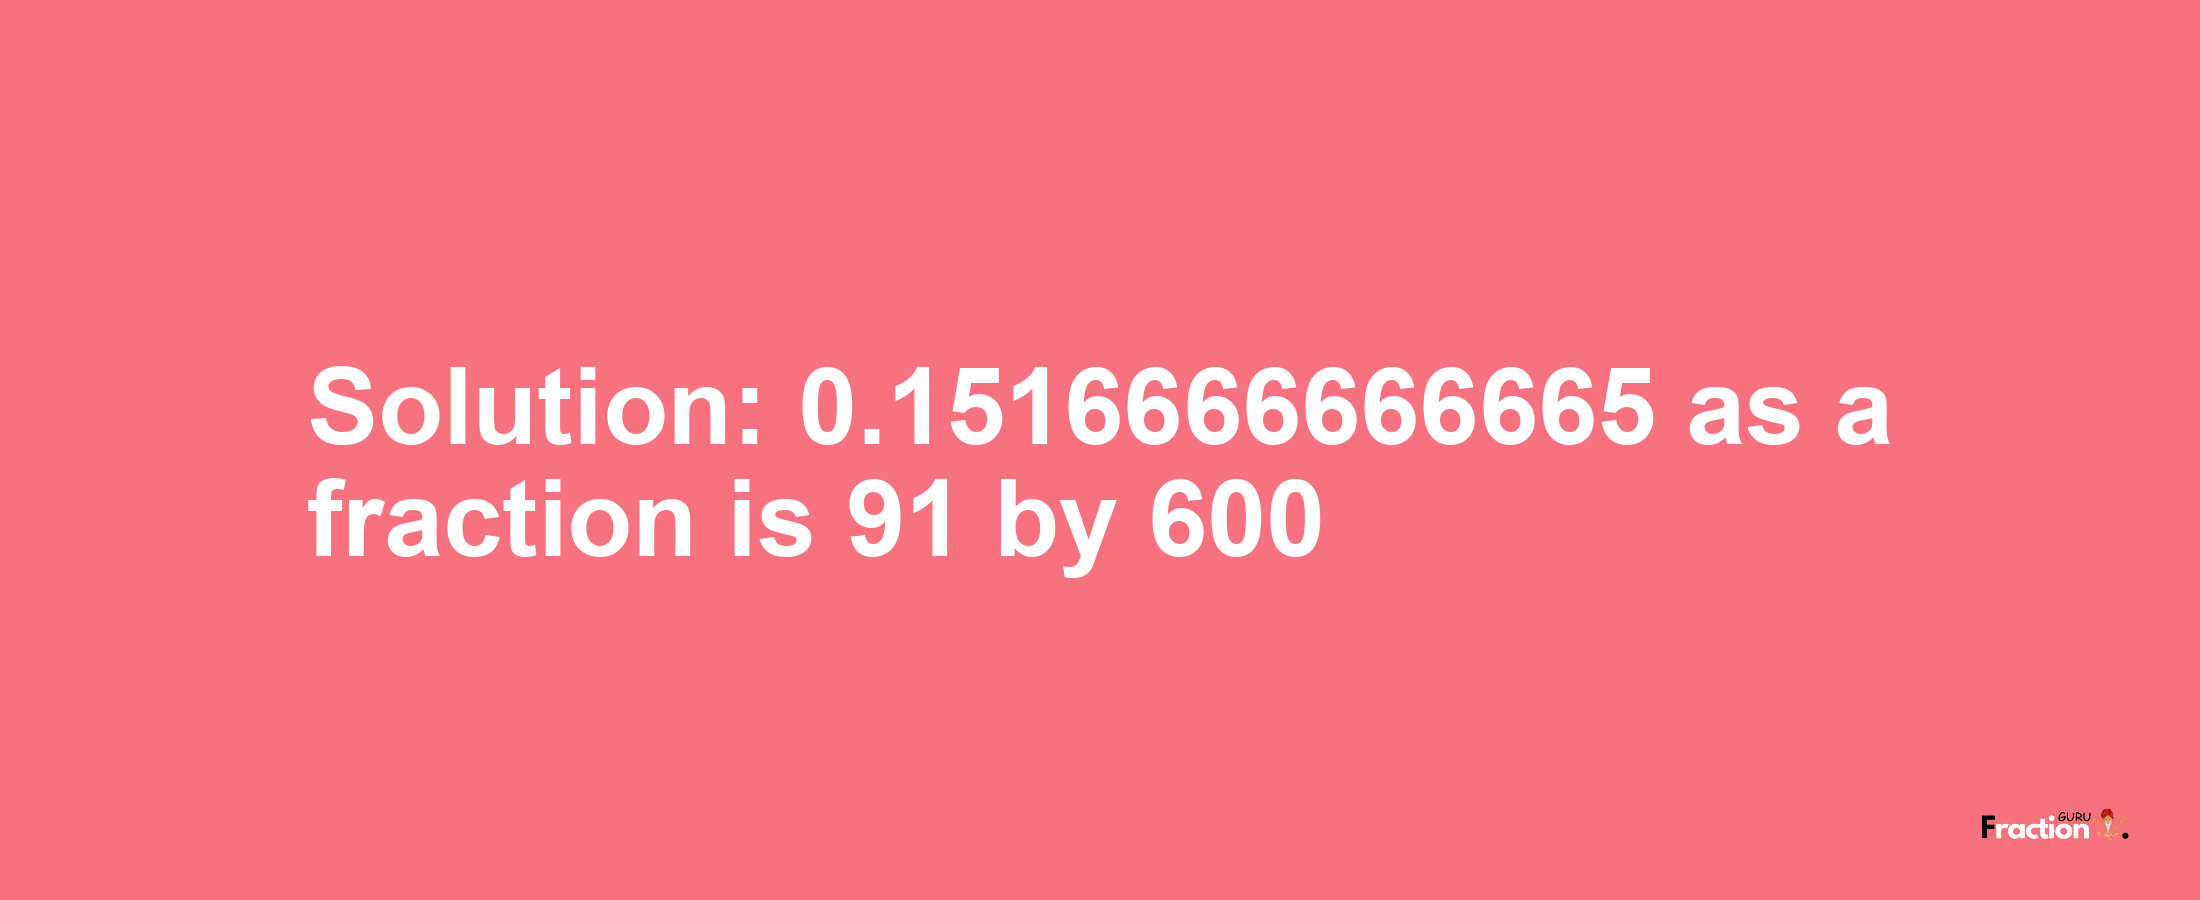 Solution:0.1516666666665 as a fraction is 91/600